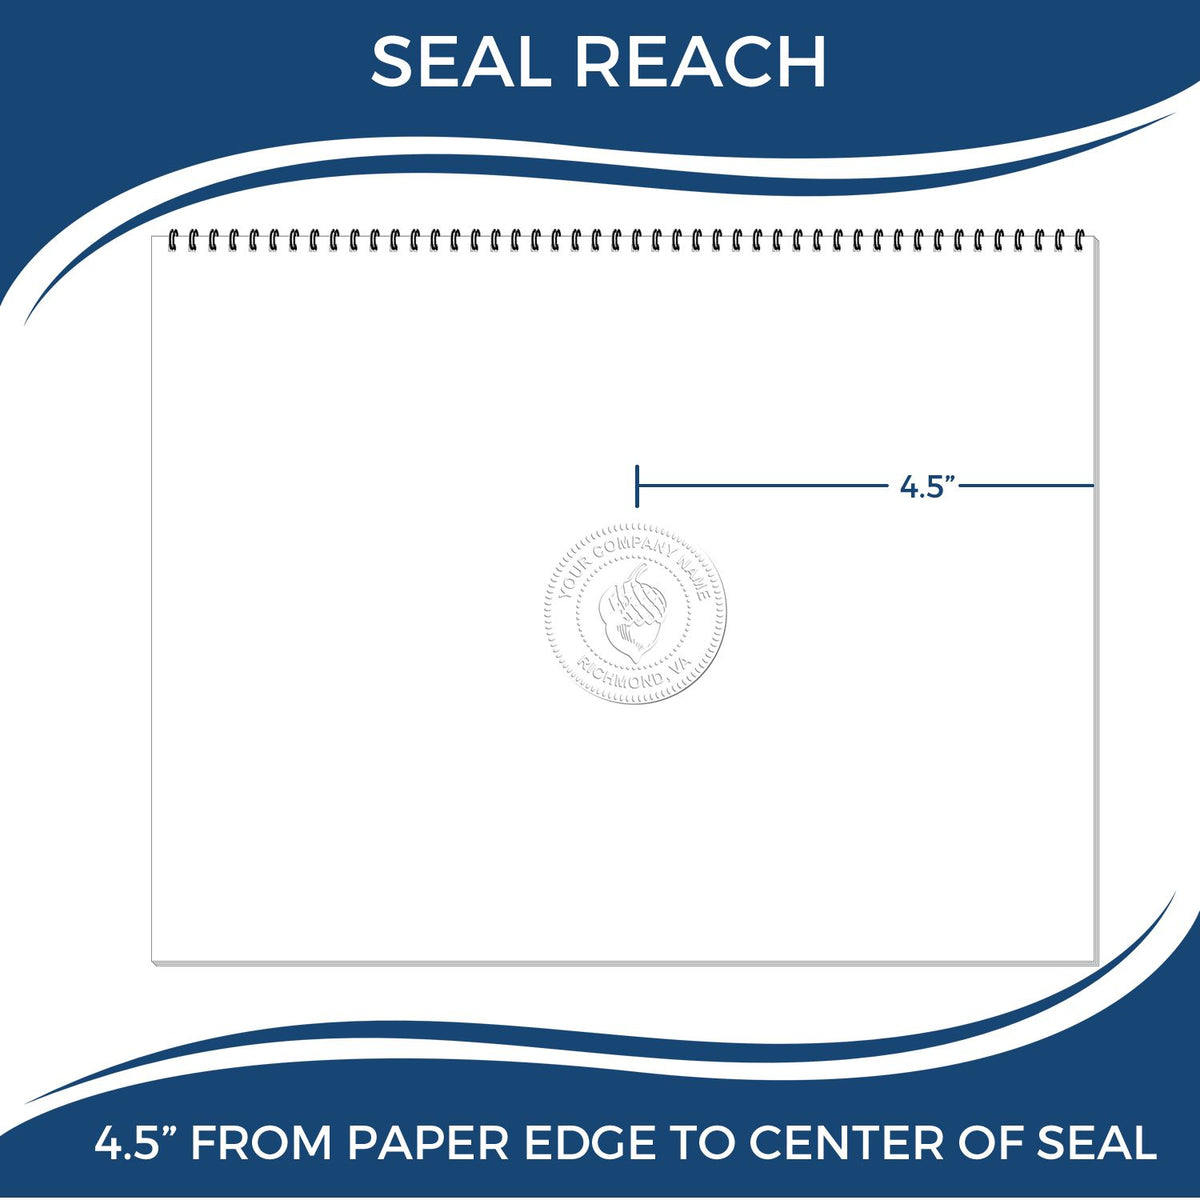 An infographic showing the seal reach which is represented by a ruler and a miniature seal image of the Extended Long Reach Florida Surveyor Embosser